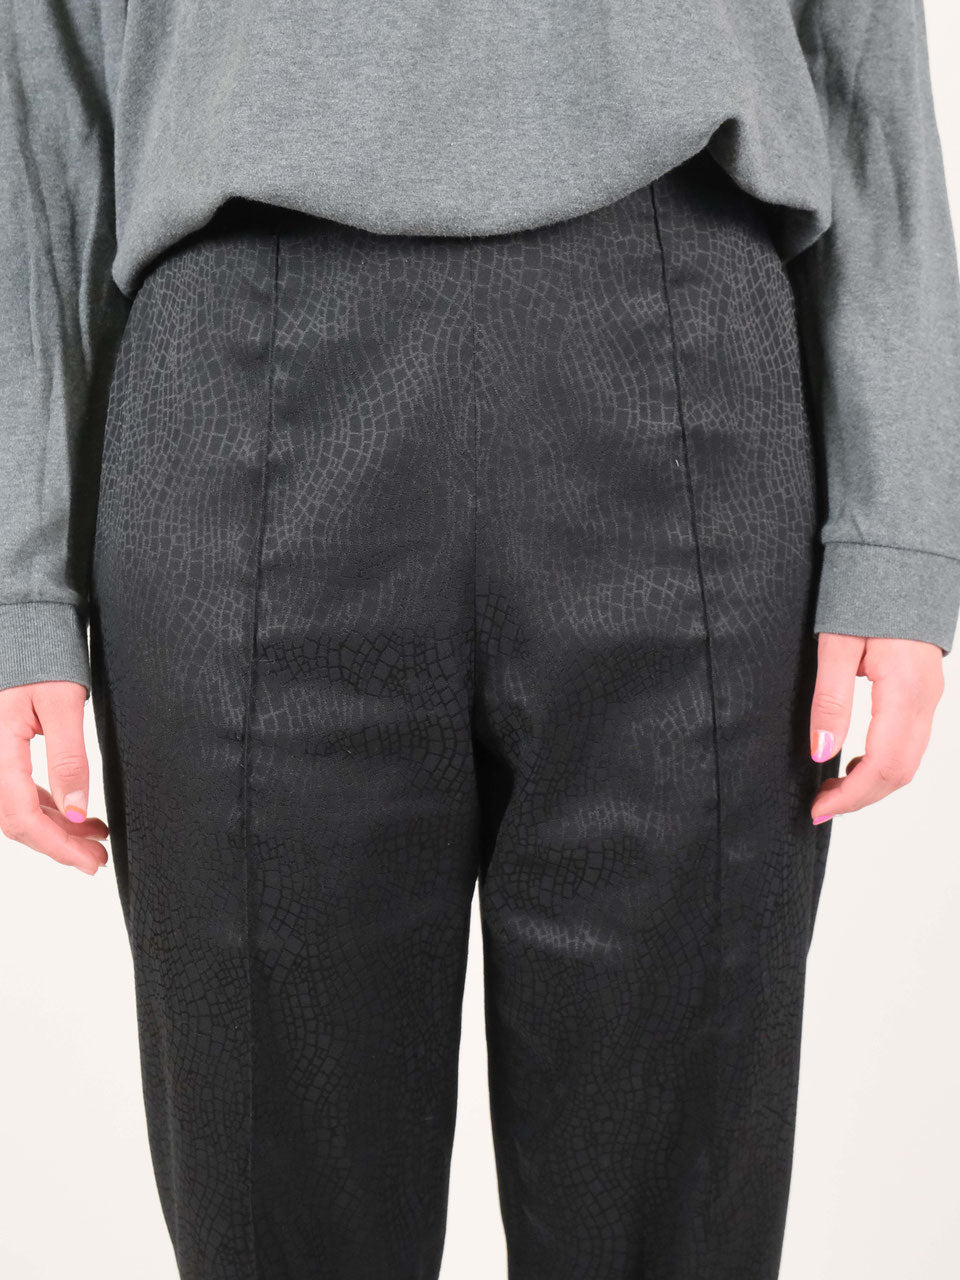 Black structured trousers